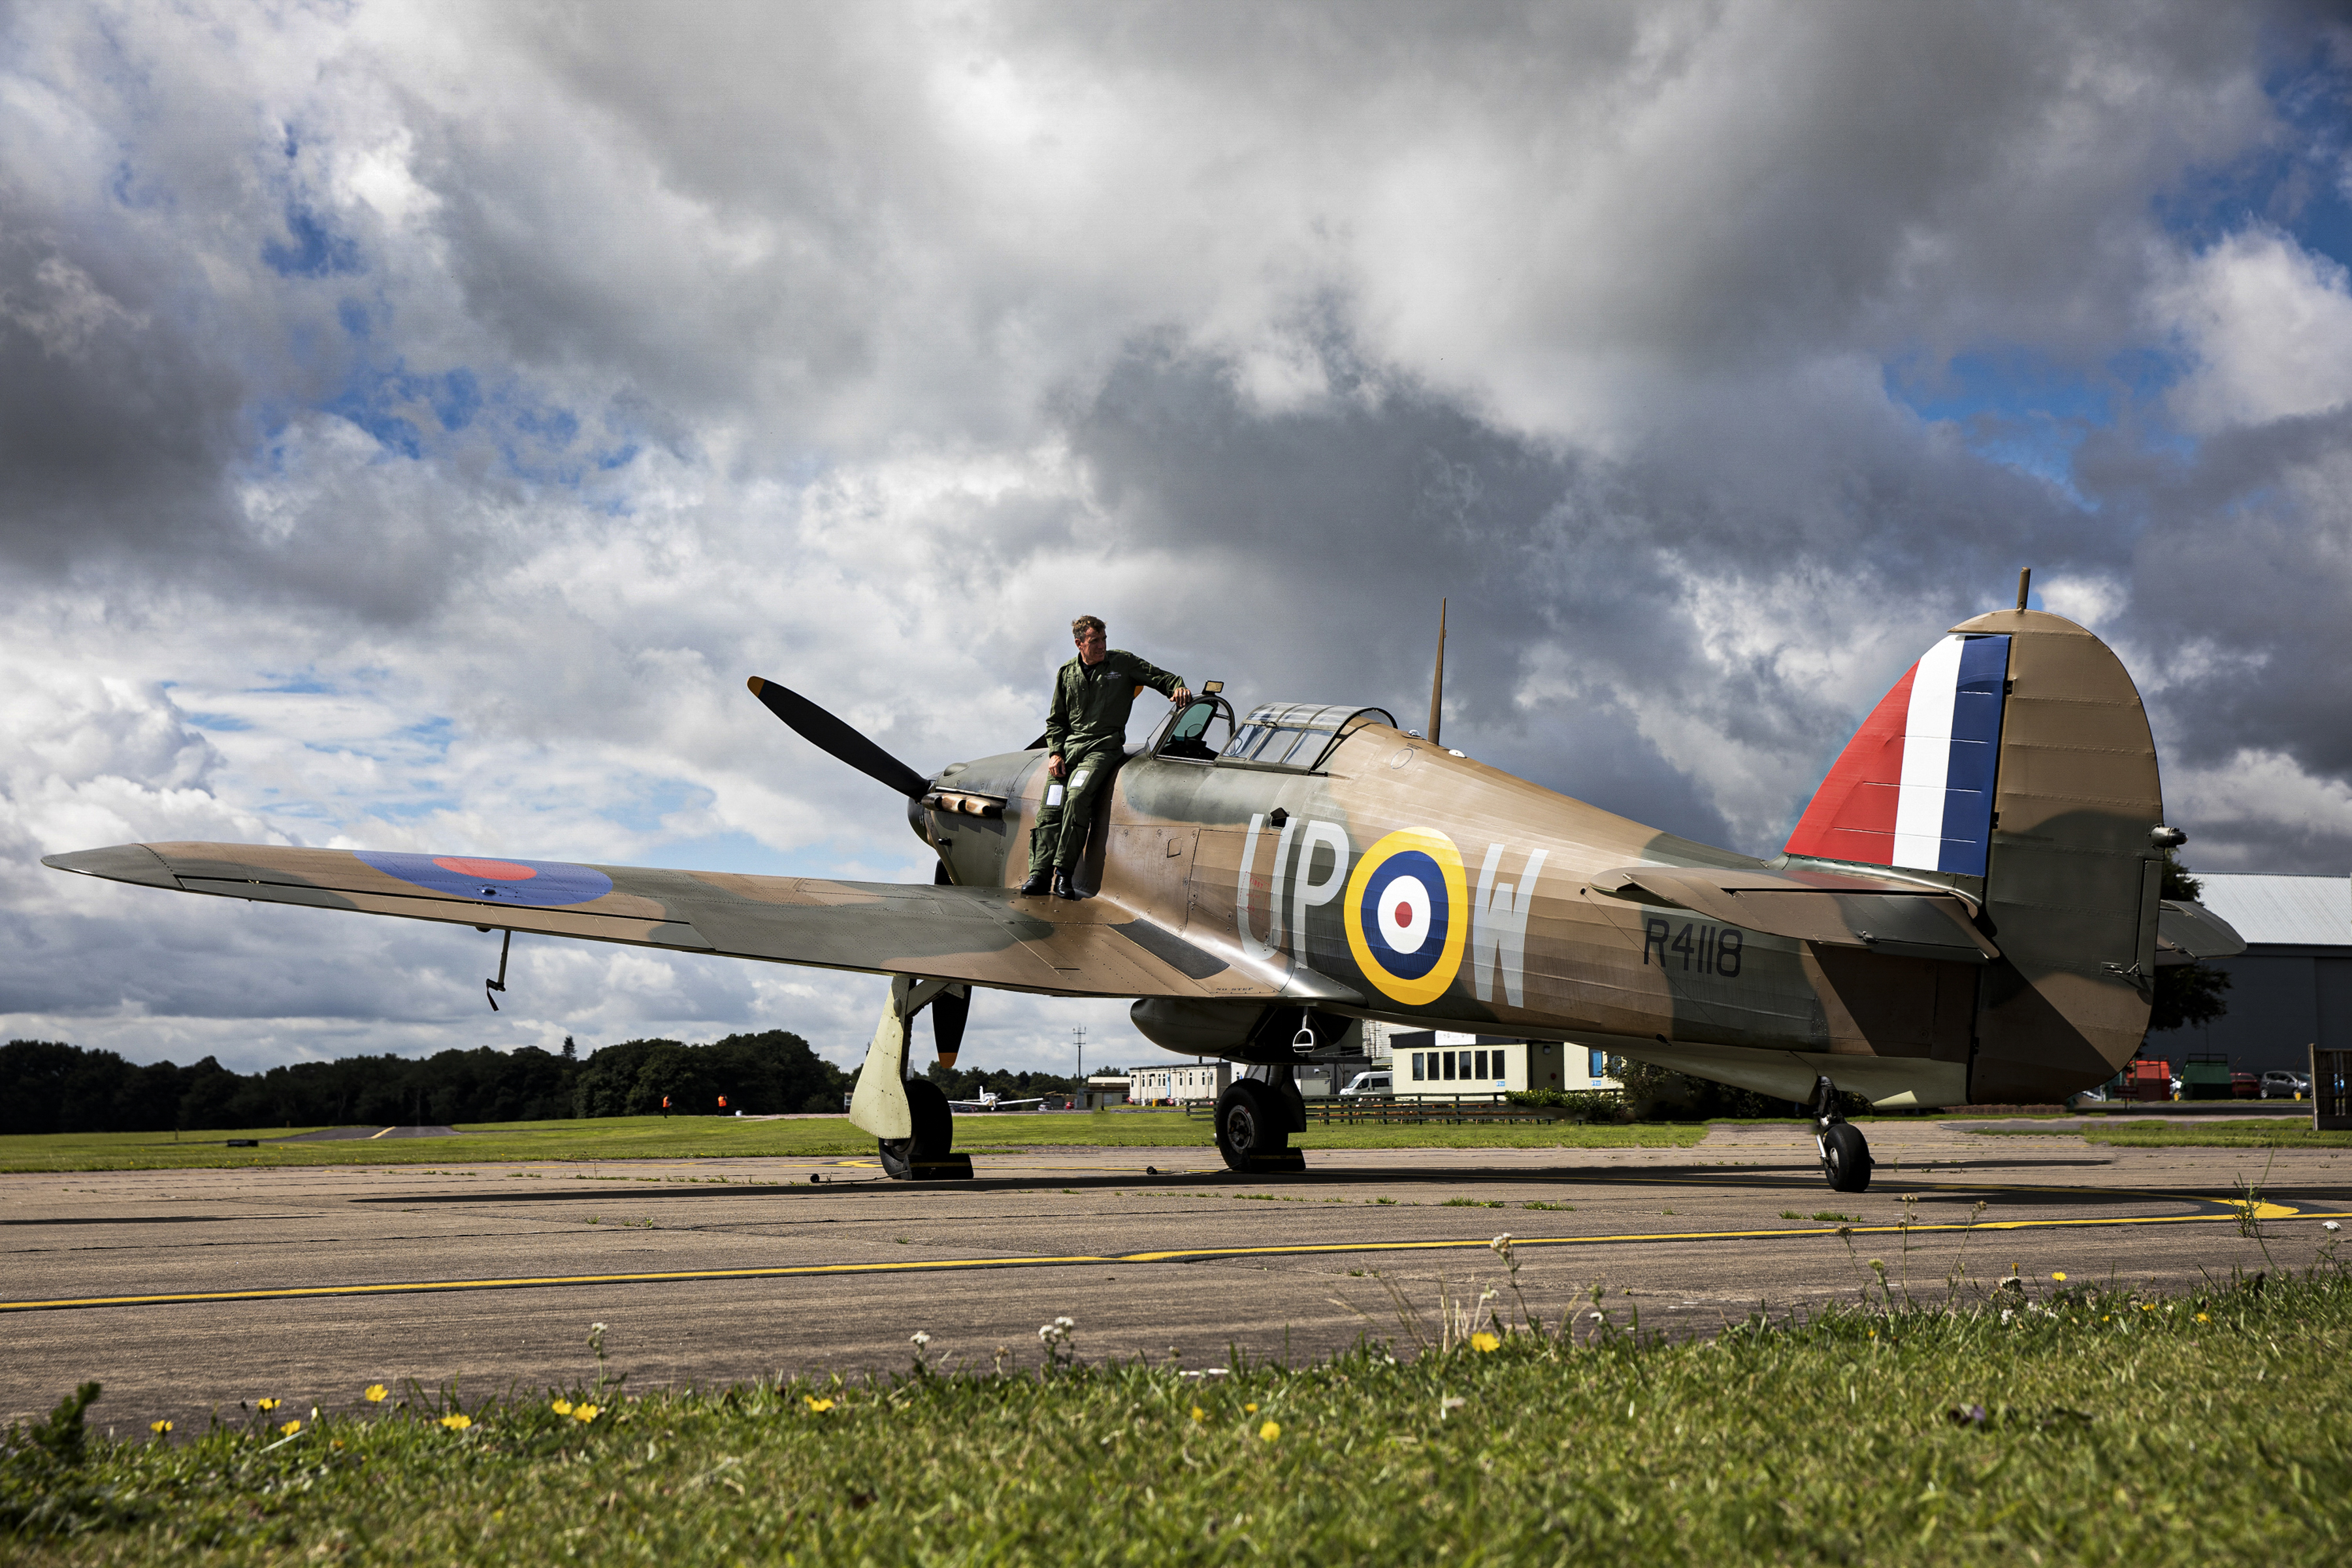 World War II Hawker Hurricane R4118 and pilot on the airfield.